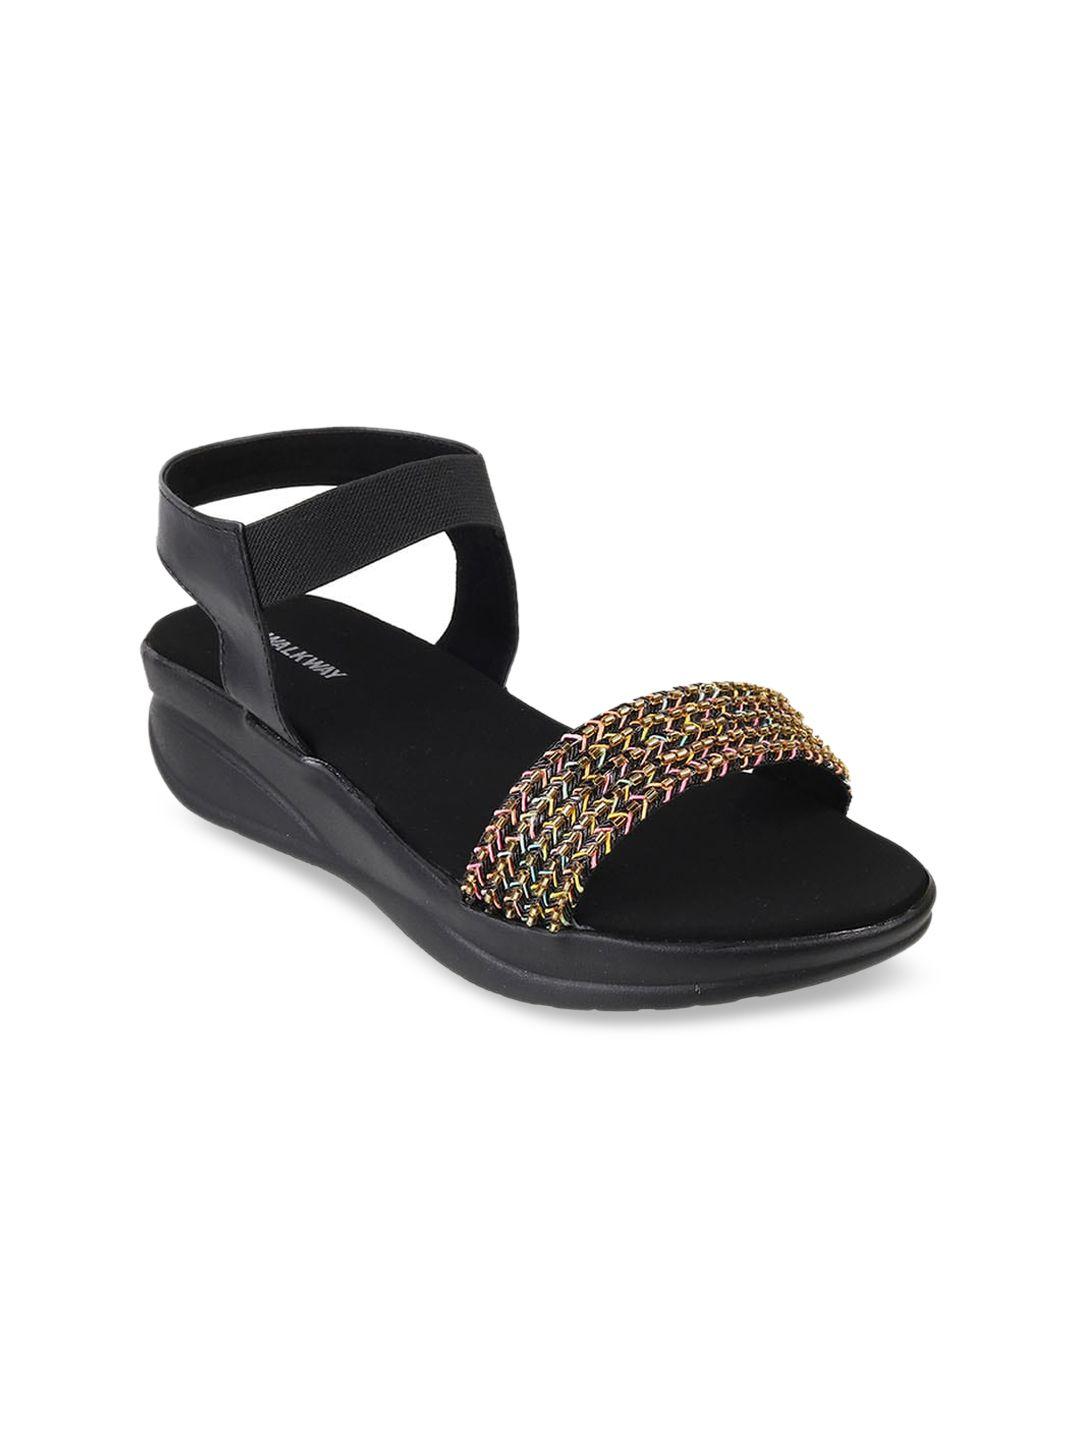 walkway by metro embellished open toe wedge sandals with backstrap